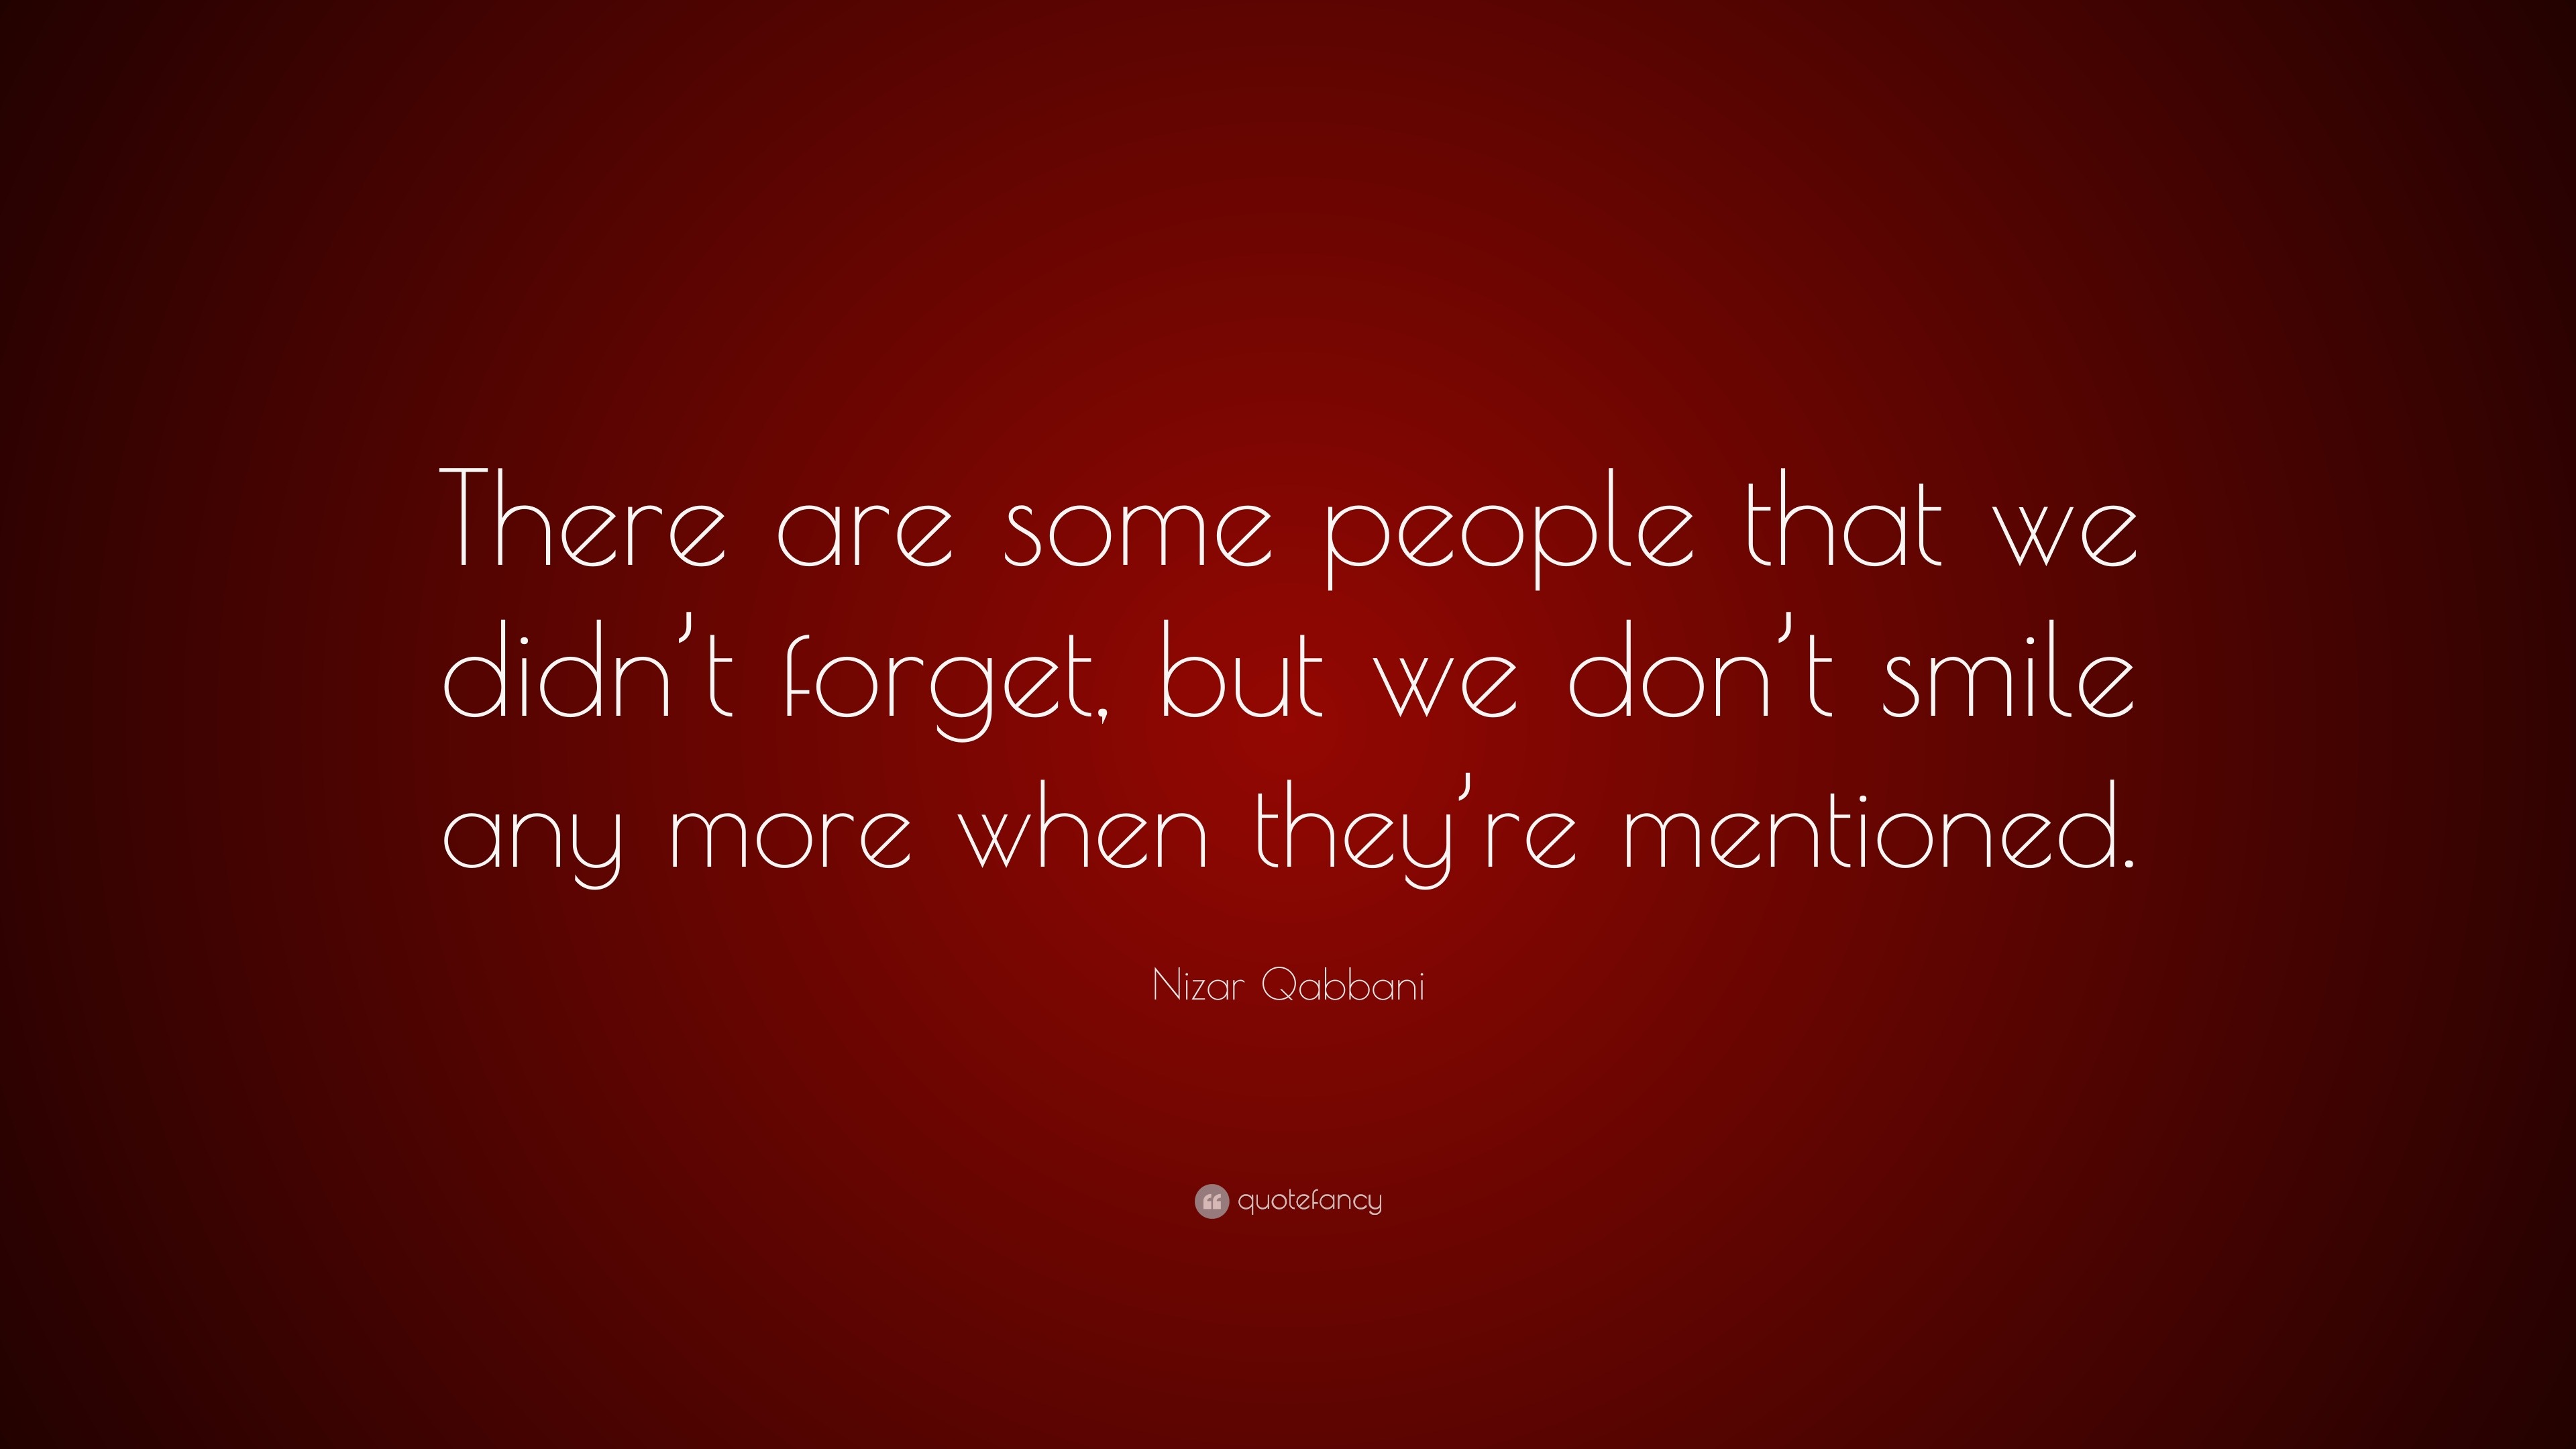 https://quotefancy.com/media/wallpaper/3840x2160/1062335-Nizar-Qabbani-Quote-There-are-some-people-that-we-didn-t-forget.jpg